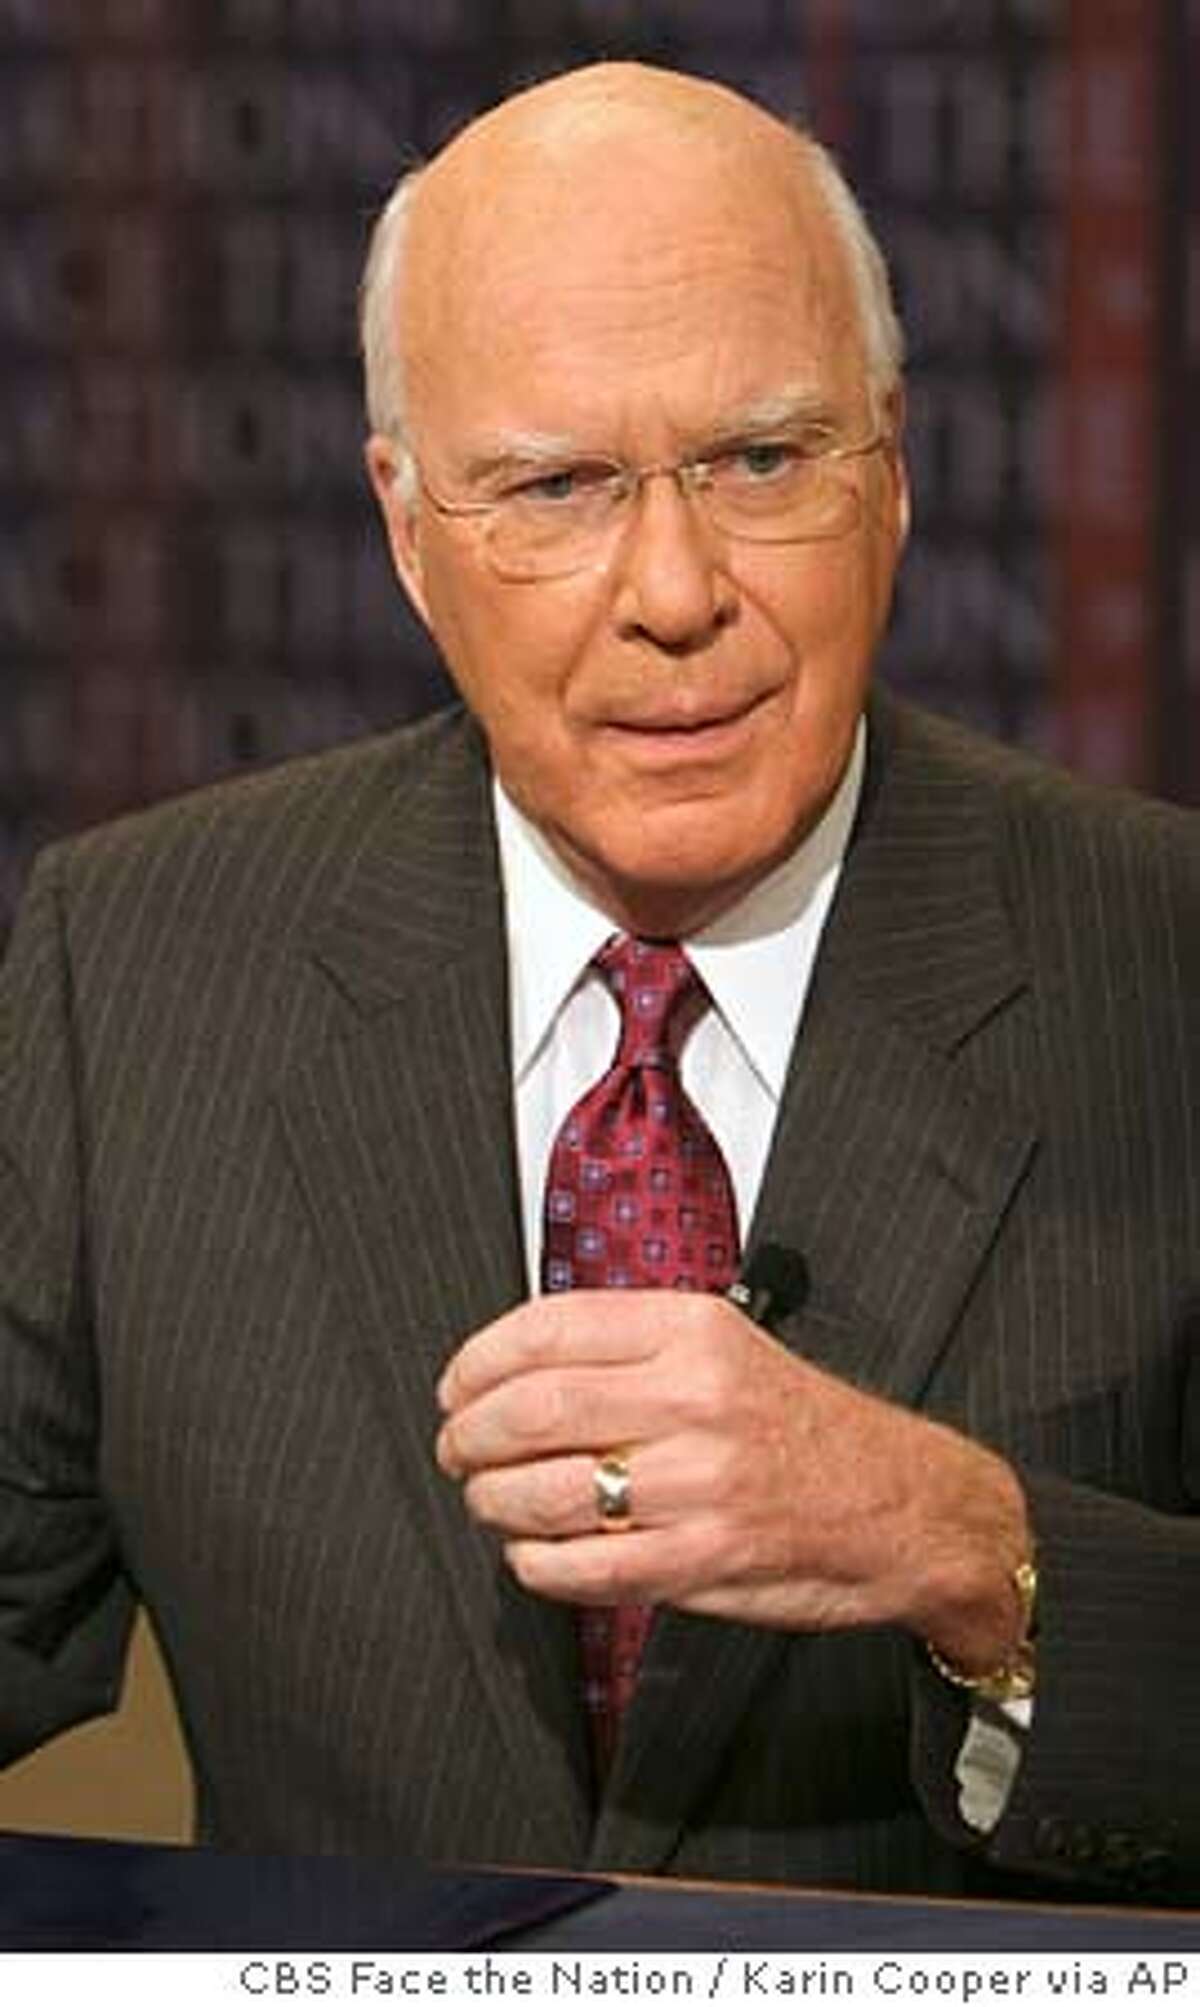 Sen. Patrick Leahy, D-Vt., gestures on the set of CBS' "Face the Nation" Sunday, Sept. 18, 2005, in Washington. President Bush will meet with Leahy and other top members of the Senate Judiciary Committee on Wednesday, Sept. 21, to talk about the next Supreme Court nominee. Leahy said he expects to hear specific names from the president at the White House breakfast meeting. (AP Photo/CBS Face the Nation, Karin Cooper) ** MANDATORY CREDIT NO ARCHIVES ** MANDATORY CREDIT: FACE THE NATION, KARIN COOPER NO ARCHIVES